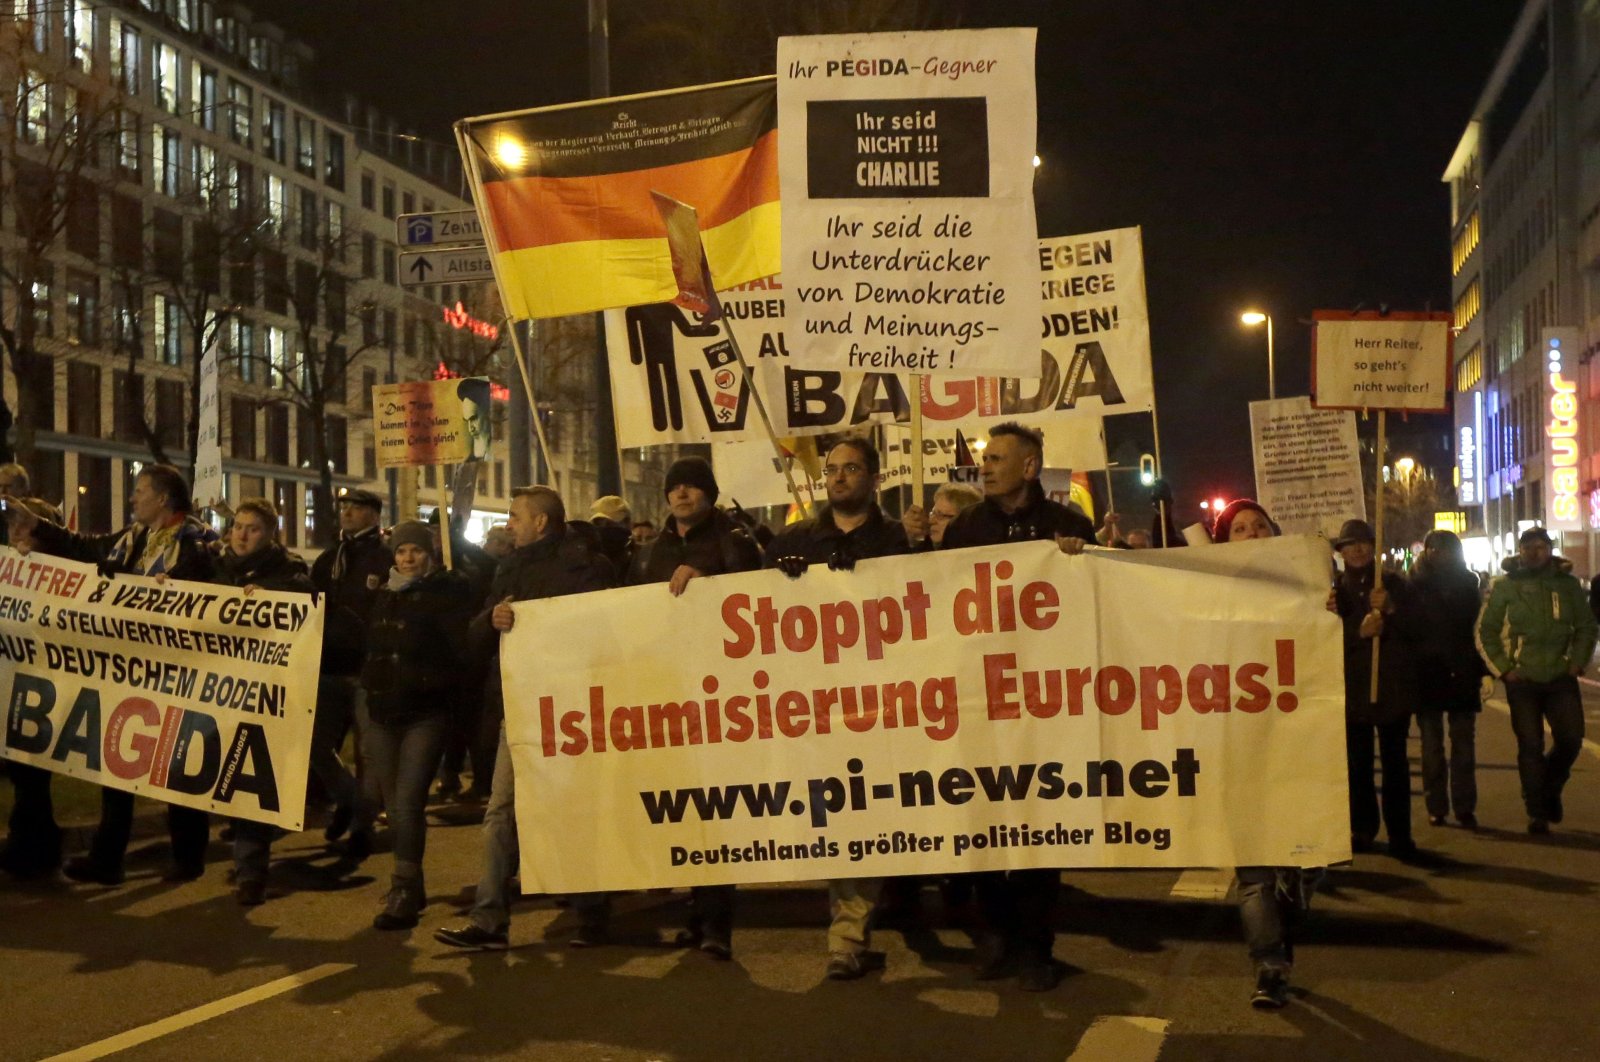 Participants of BAGIDA, the Bavarian section of the anti-immigration and Islamophobic far-right movement PEGIDA, gather in Munich, Germany, Jan. 19, 2015. (AP Photo)